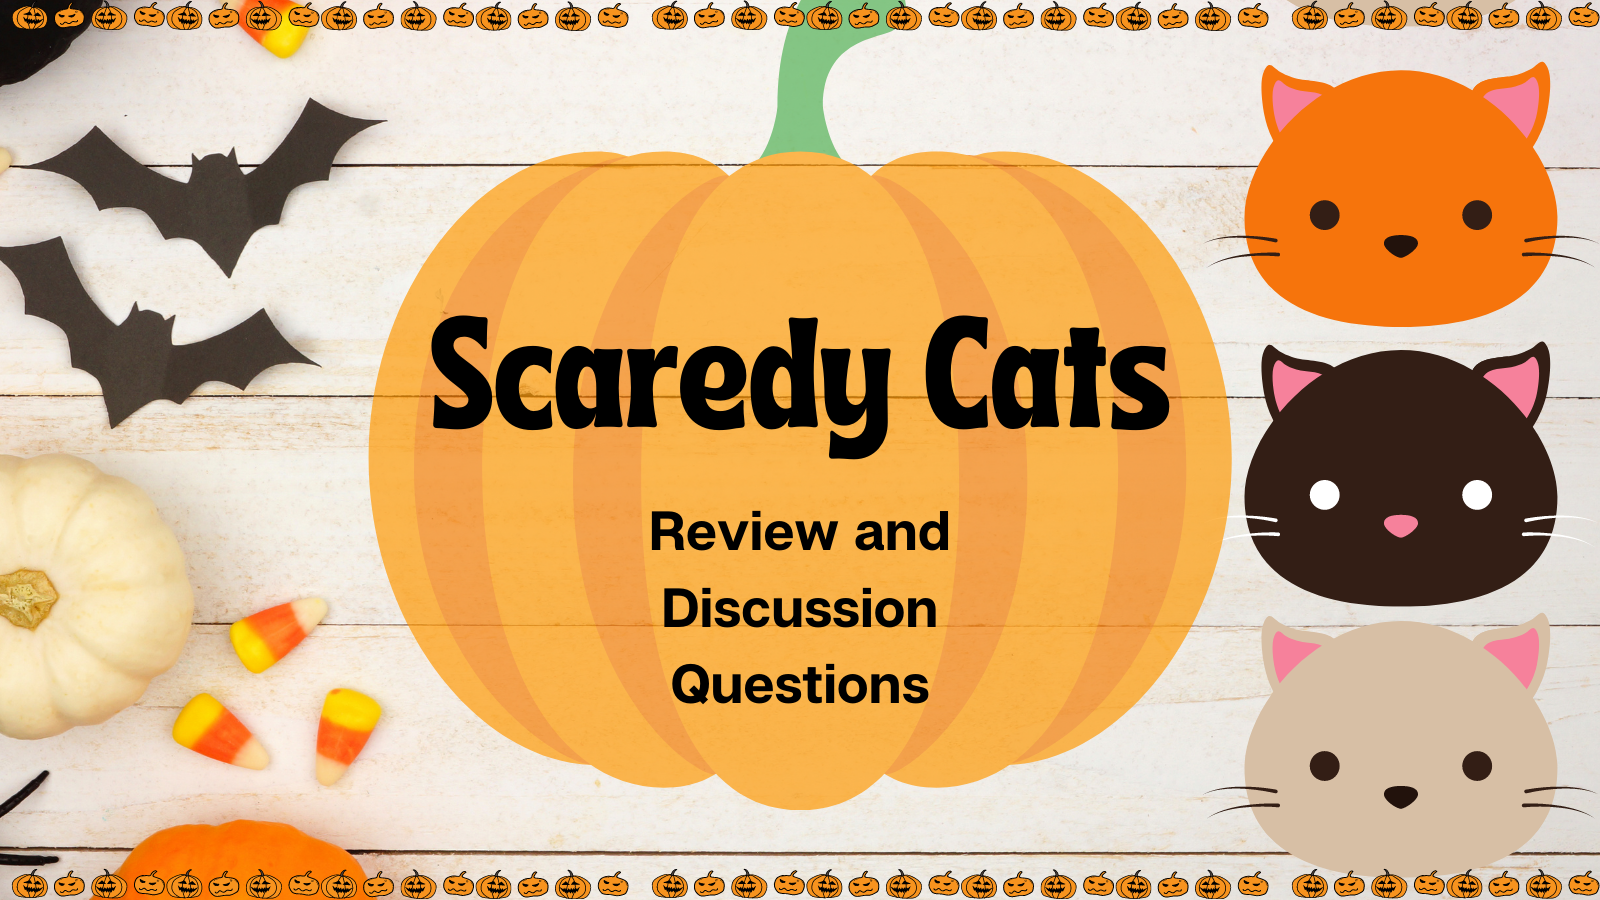 Scaredy Cats' Netflix Review: Stream It Or Skip It?